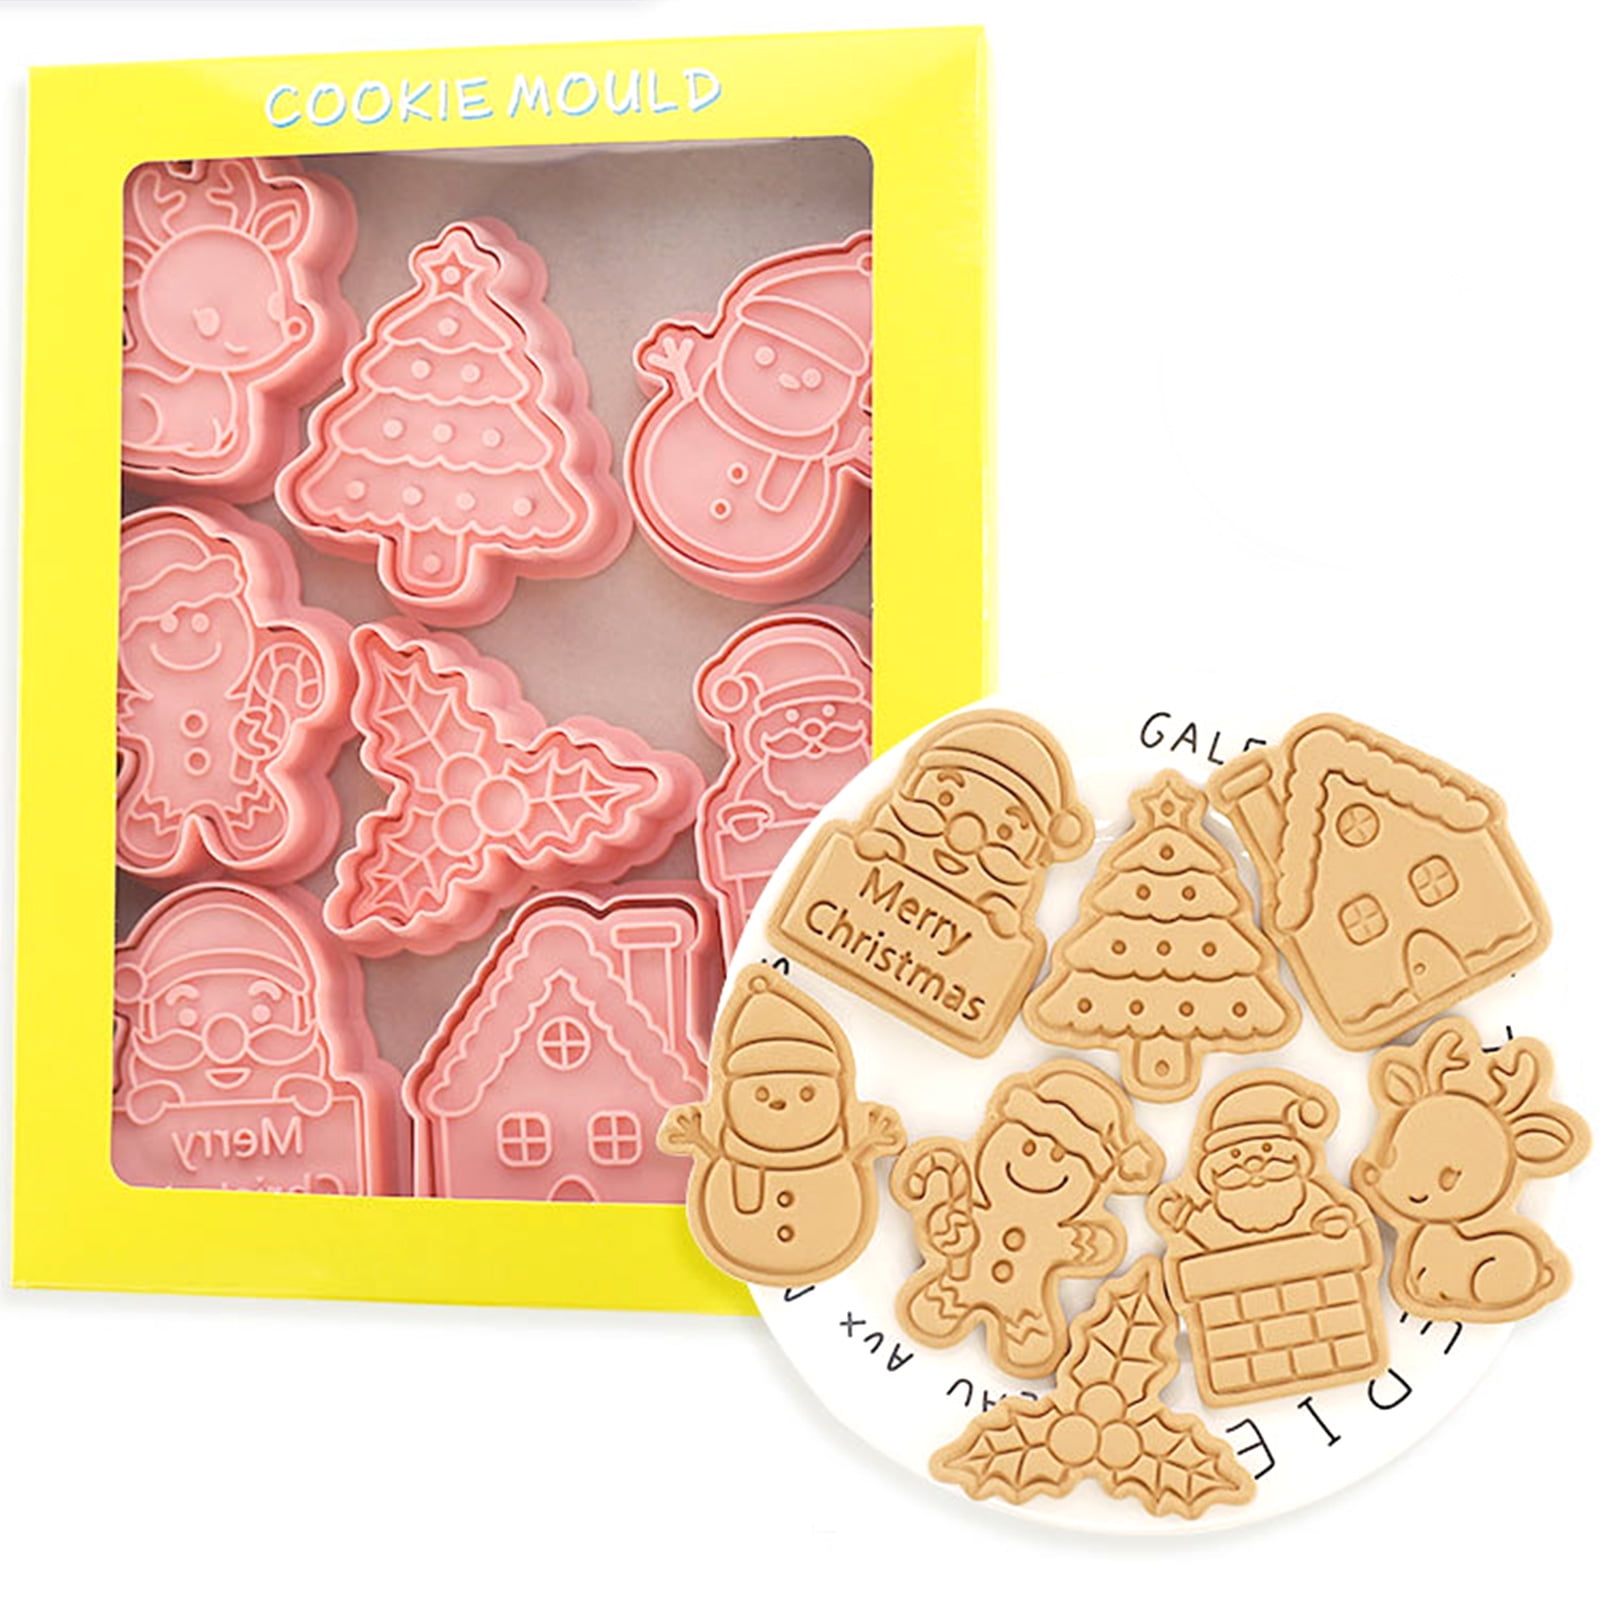 8 pcs Mouse Cookie Stamp, Cartoon Stamped Embossed Cookie Cutter Molds,  Children's Baking Set, for Cookie Baking Supplies, Kids Birthday Party